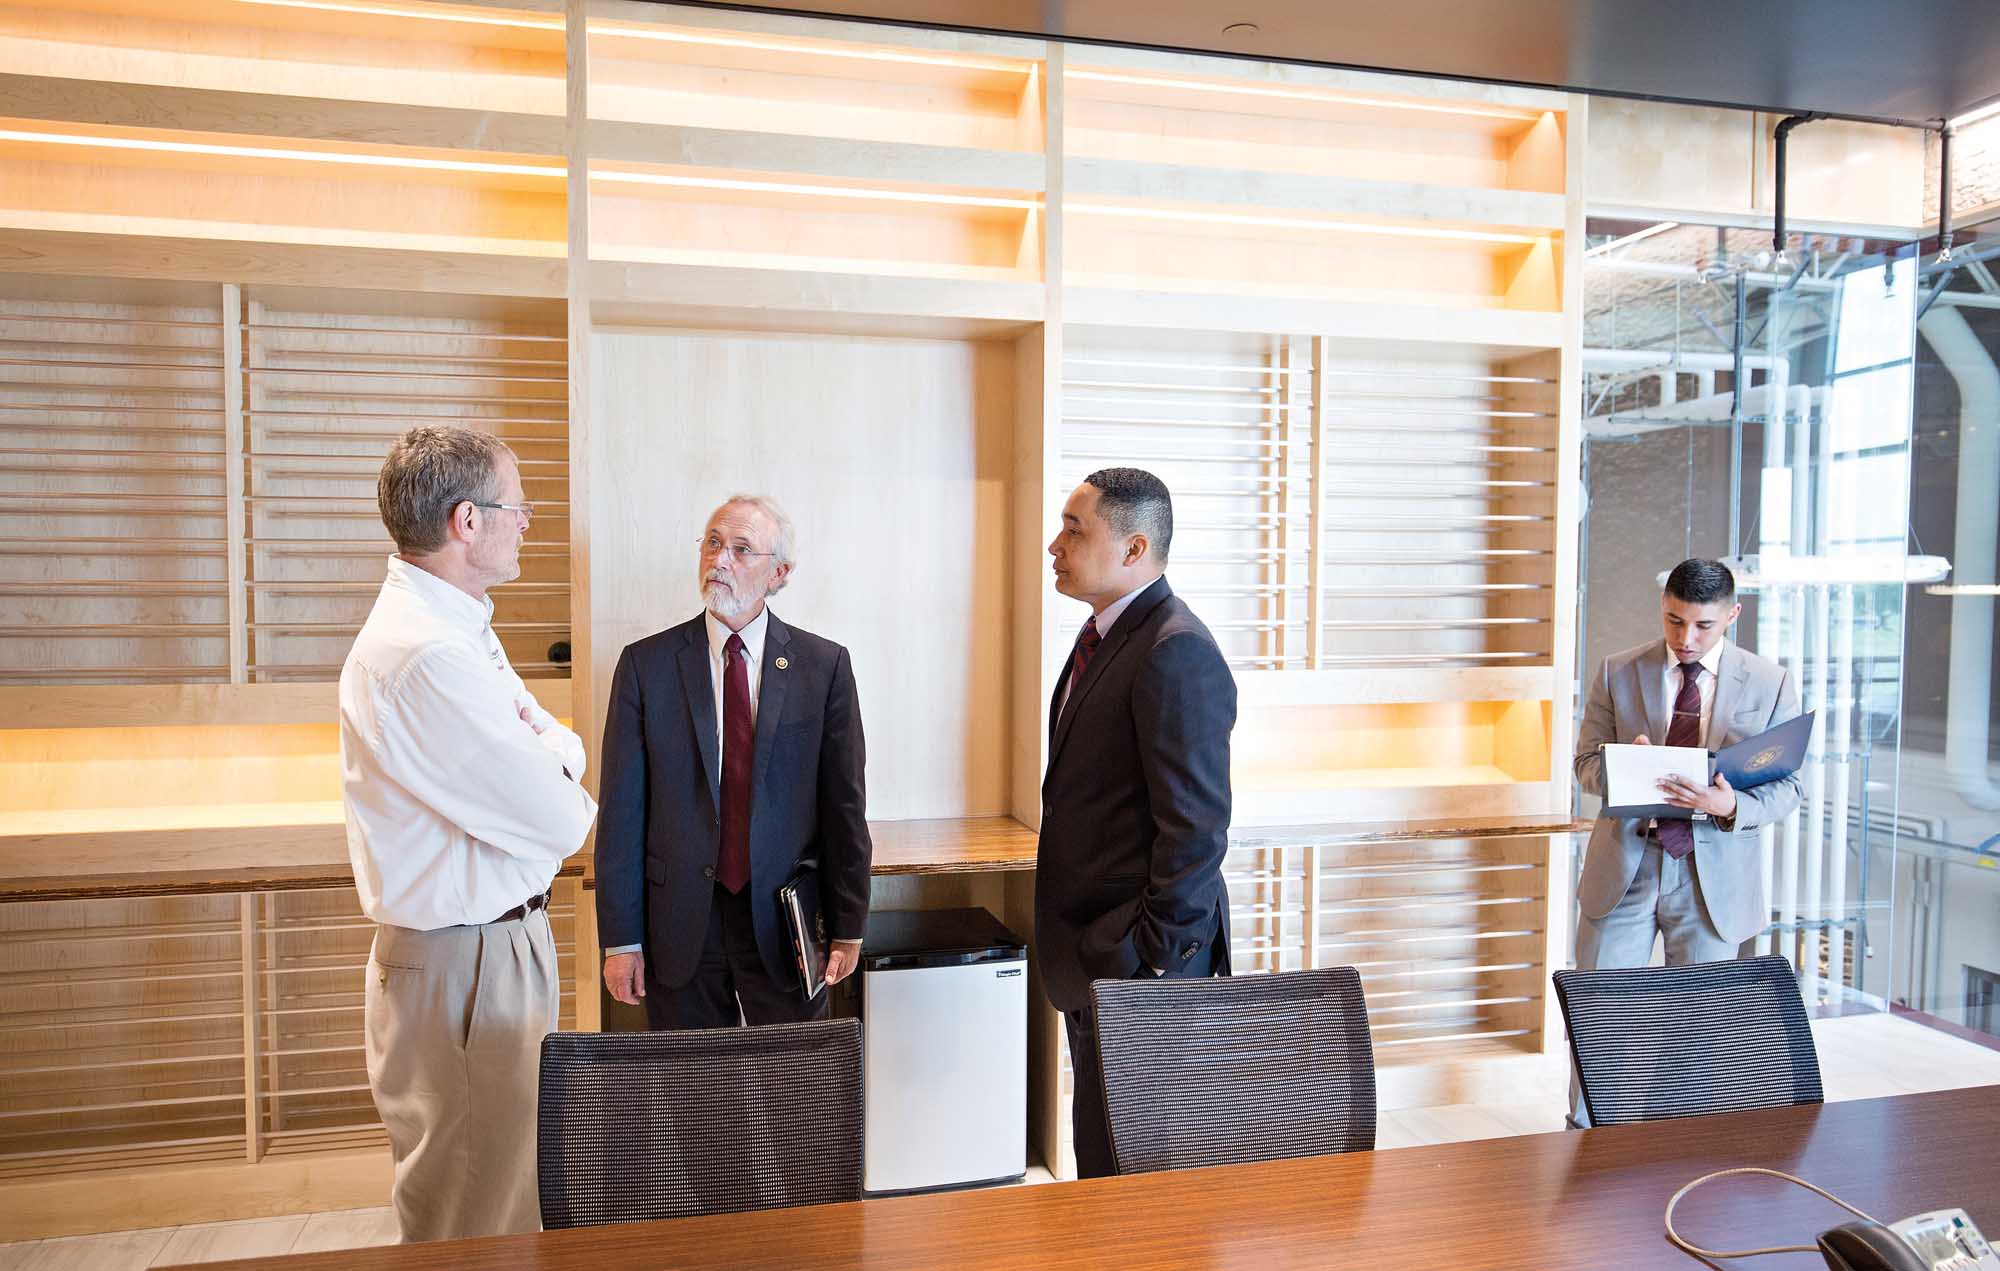 Thomas Henick-Kling, left, talks with U.S. Rep. Dan Newhouse, center left, on May 4, 2015, during a tour of the new Washington State University Wine Science Center. This room is the wine library room for meetings and tastings. (TJ Mullinax/Good Fruit Grower)